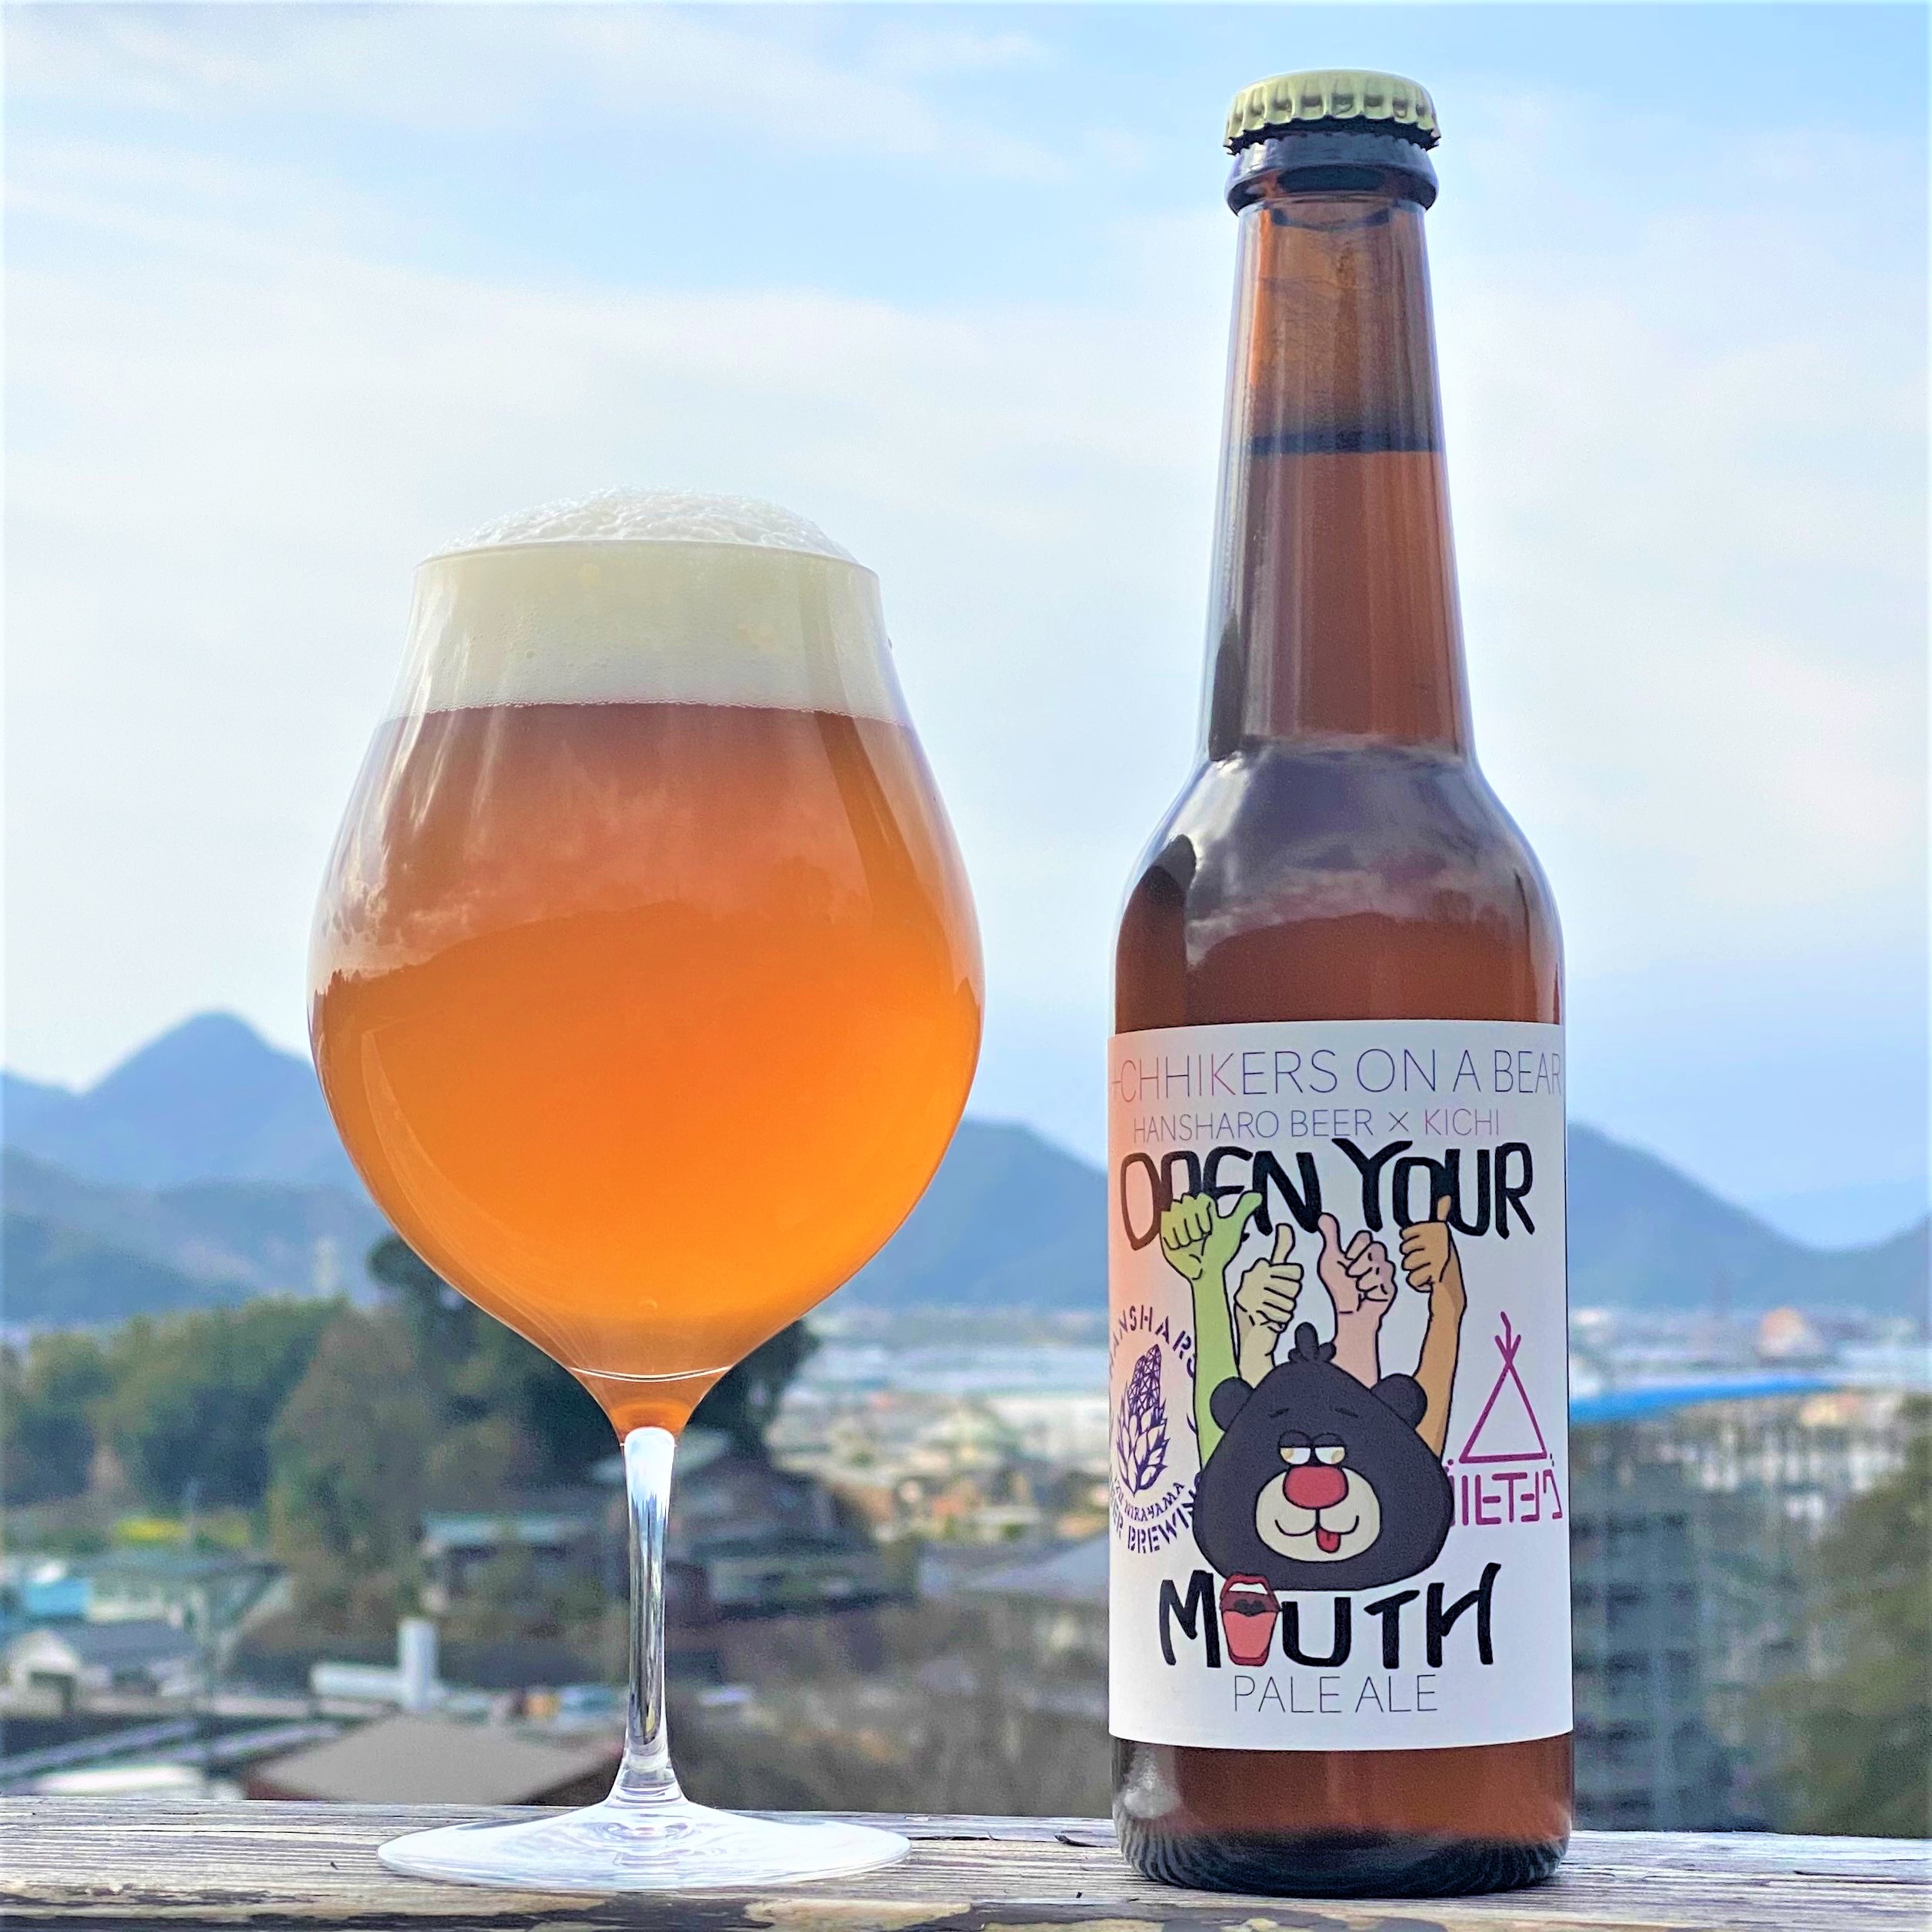 Hitchhikers On a Bear「OPEN YOUR MOUTH PALE ALE」